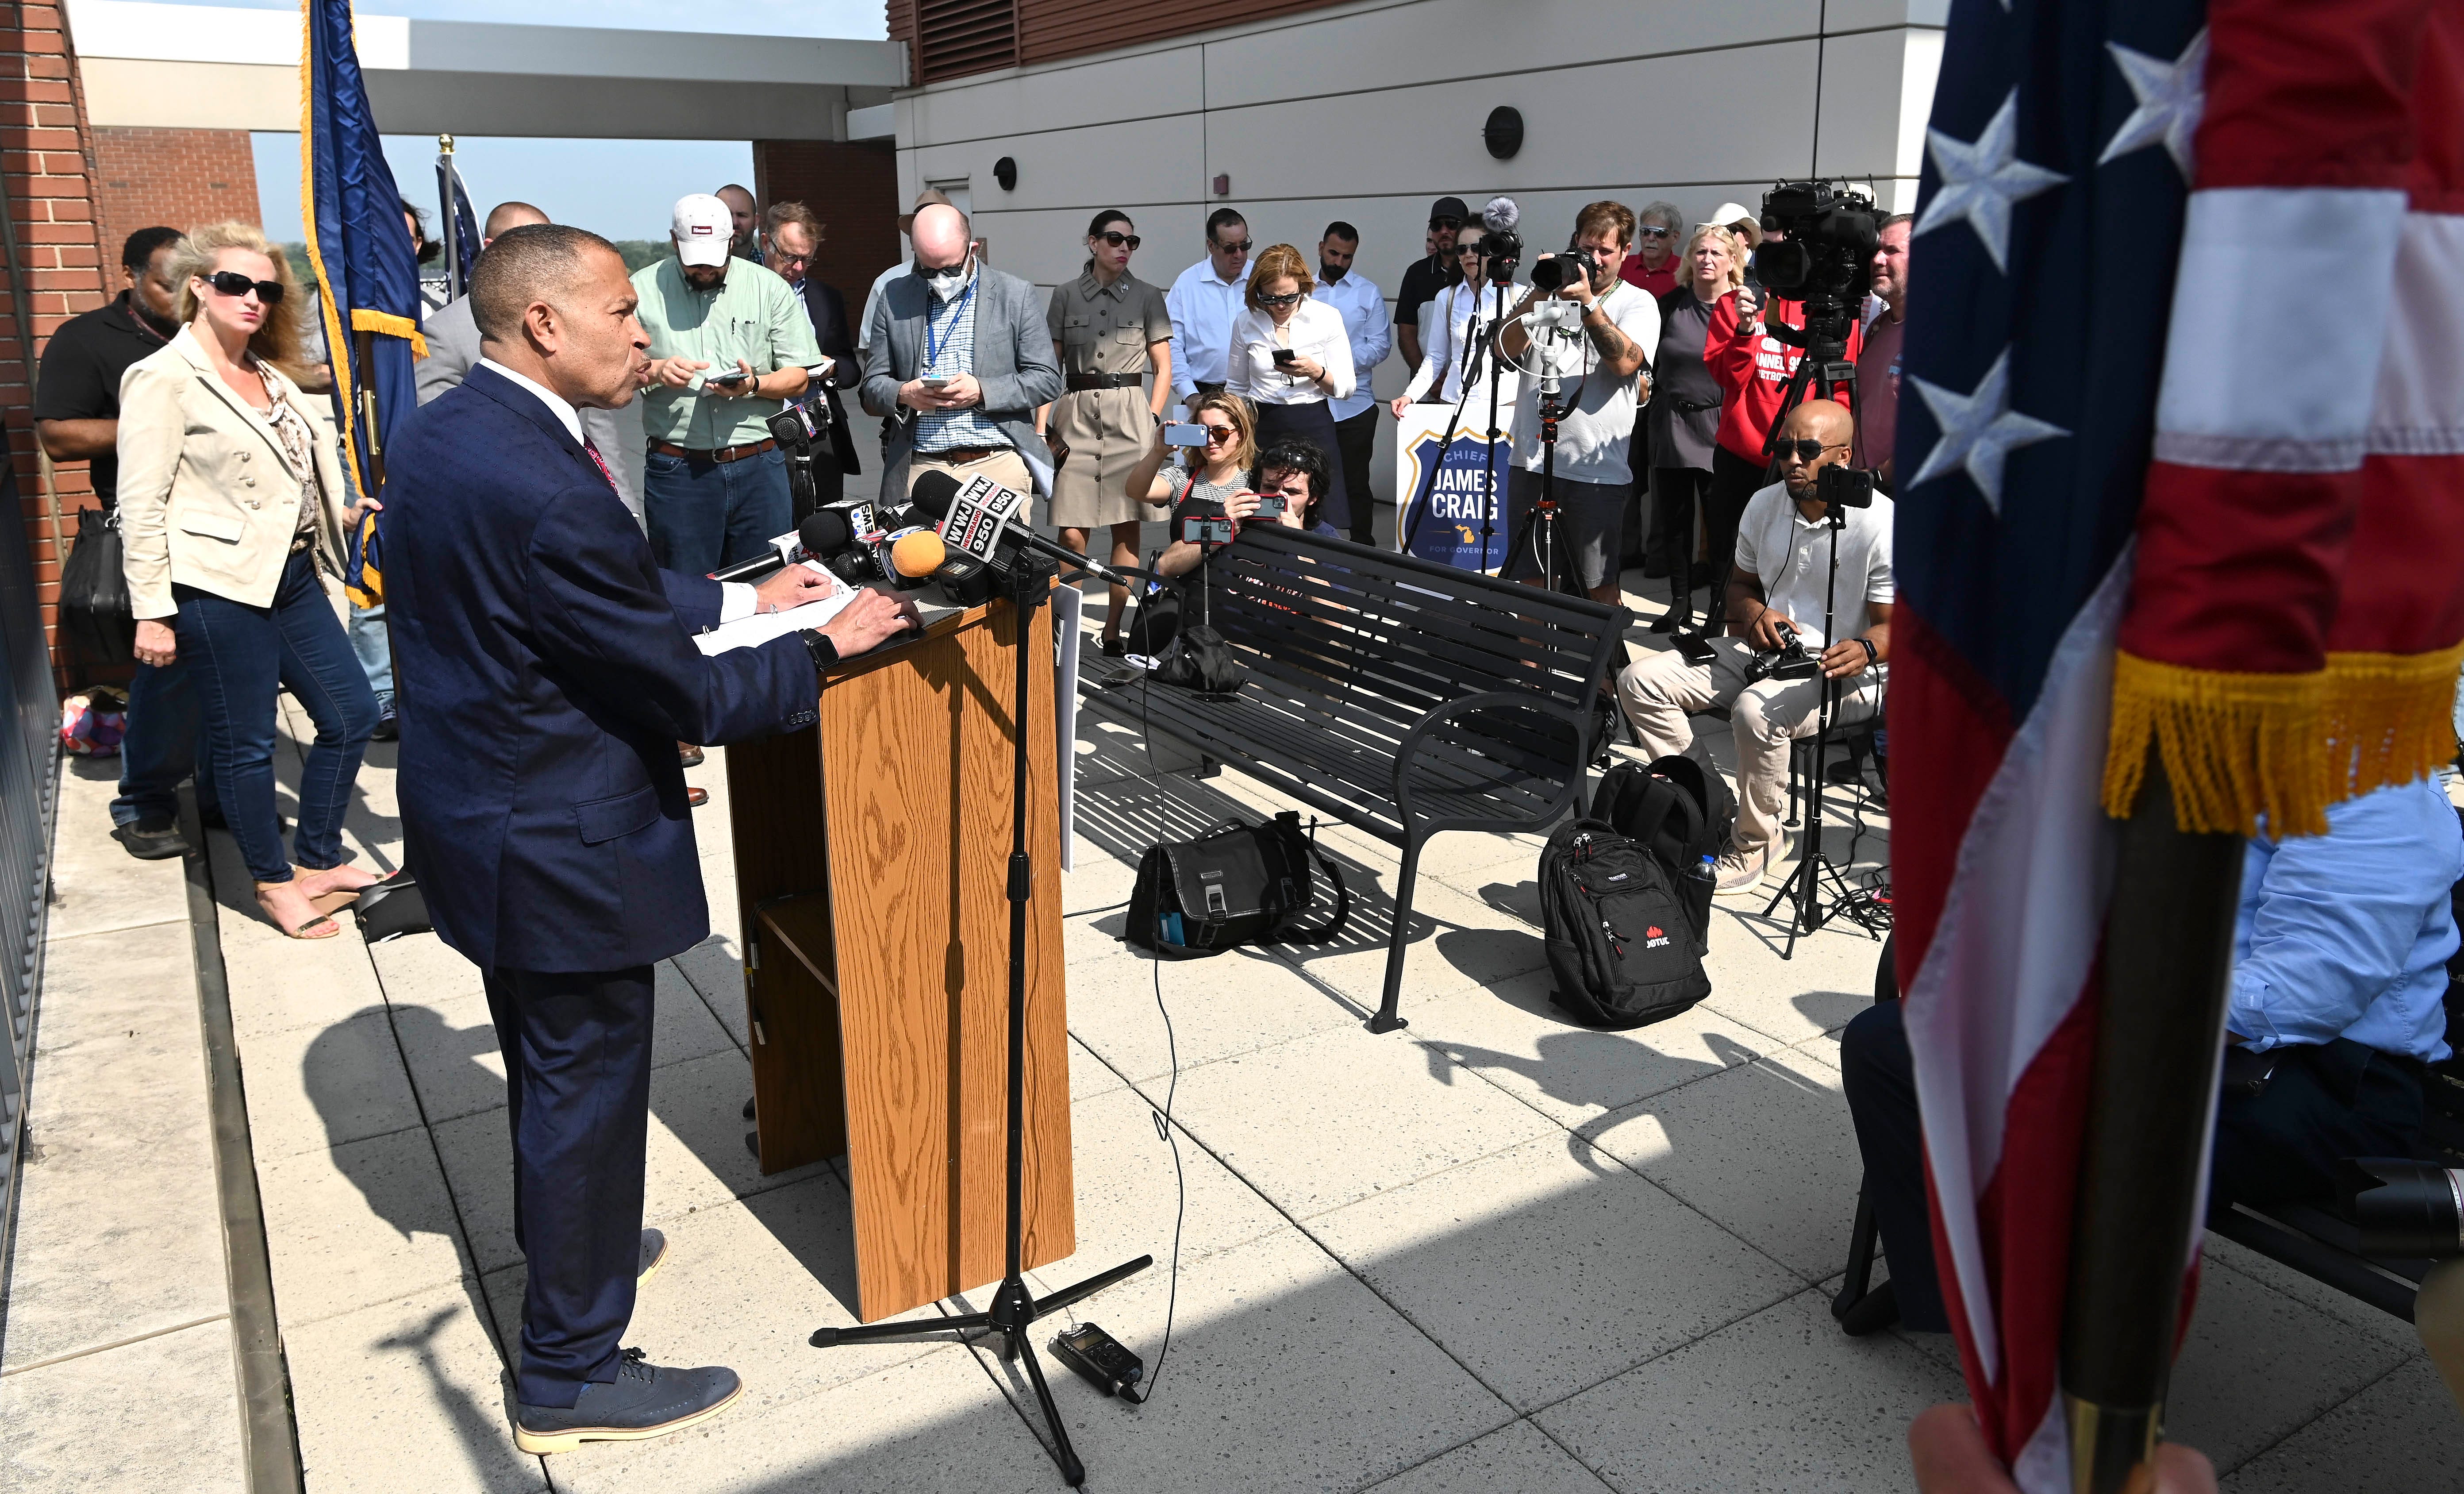 Former Detroit Police Chief James Craig announcing his Republican candidacy for Michigan governor in front of supporters and the media on the eighth floor of the Icon building, formerly the UAW-GM Center for Human Resources, in Detroit, Tuesday afternoon, September 14, 2021. \